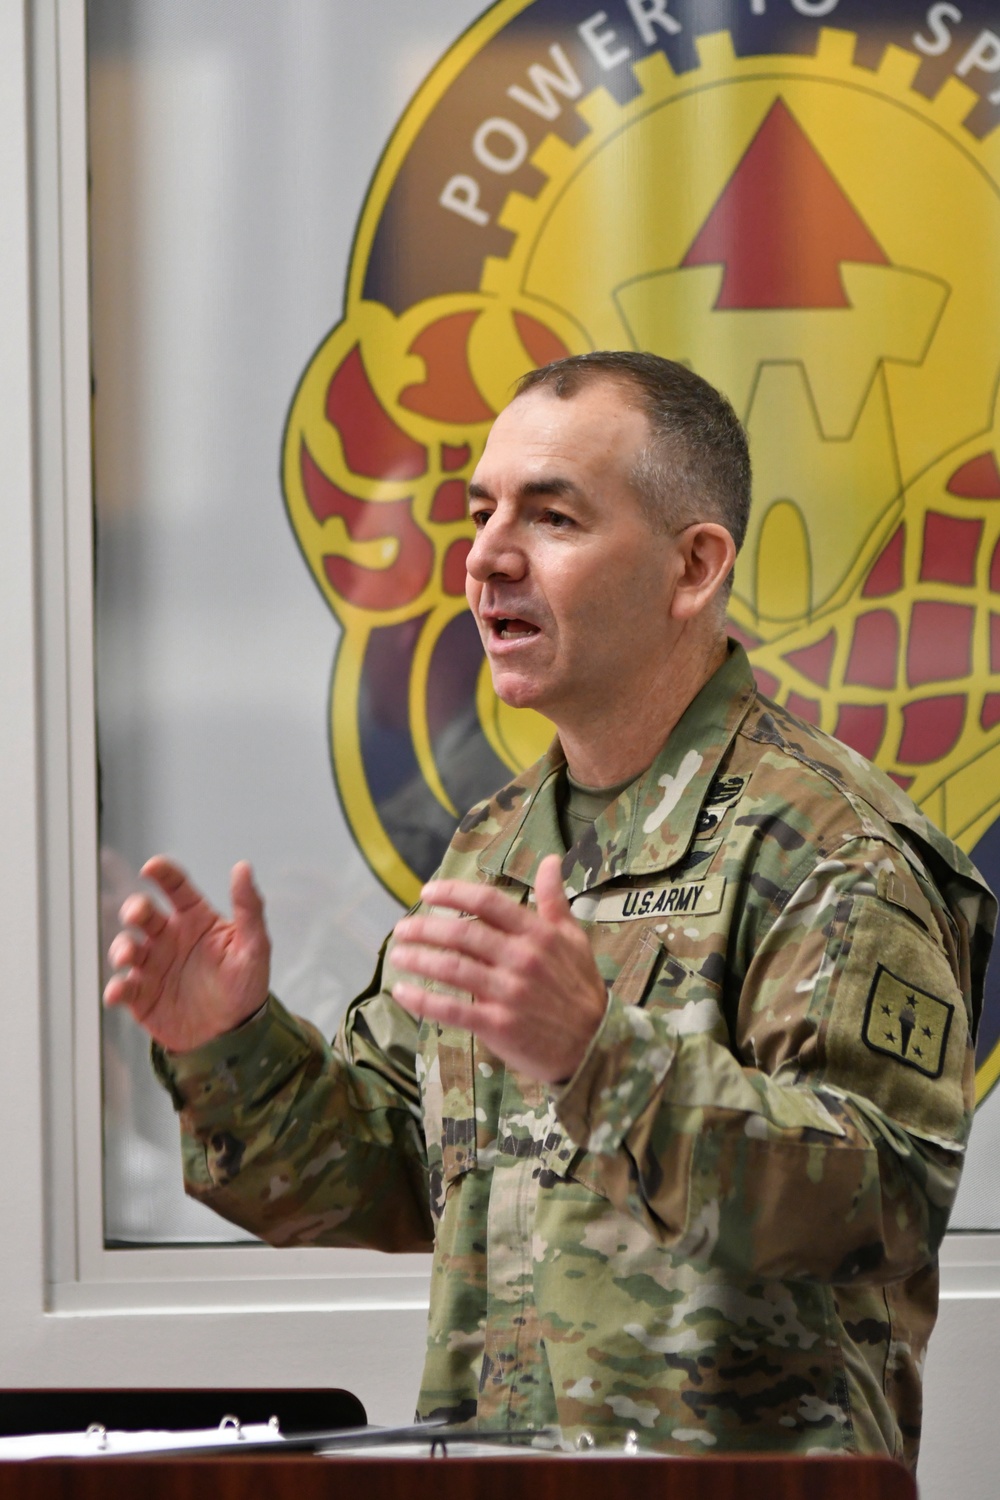 Ordnance Corps welcomes new chief warrant officer